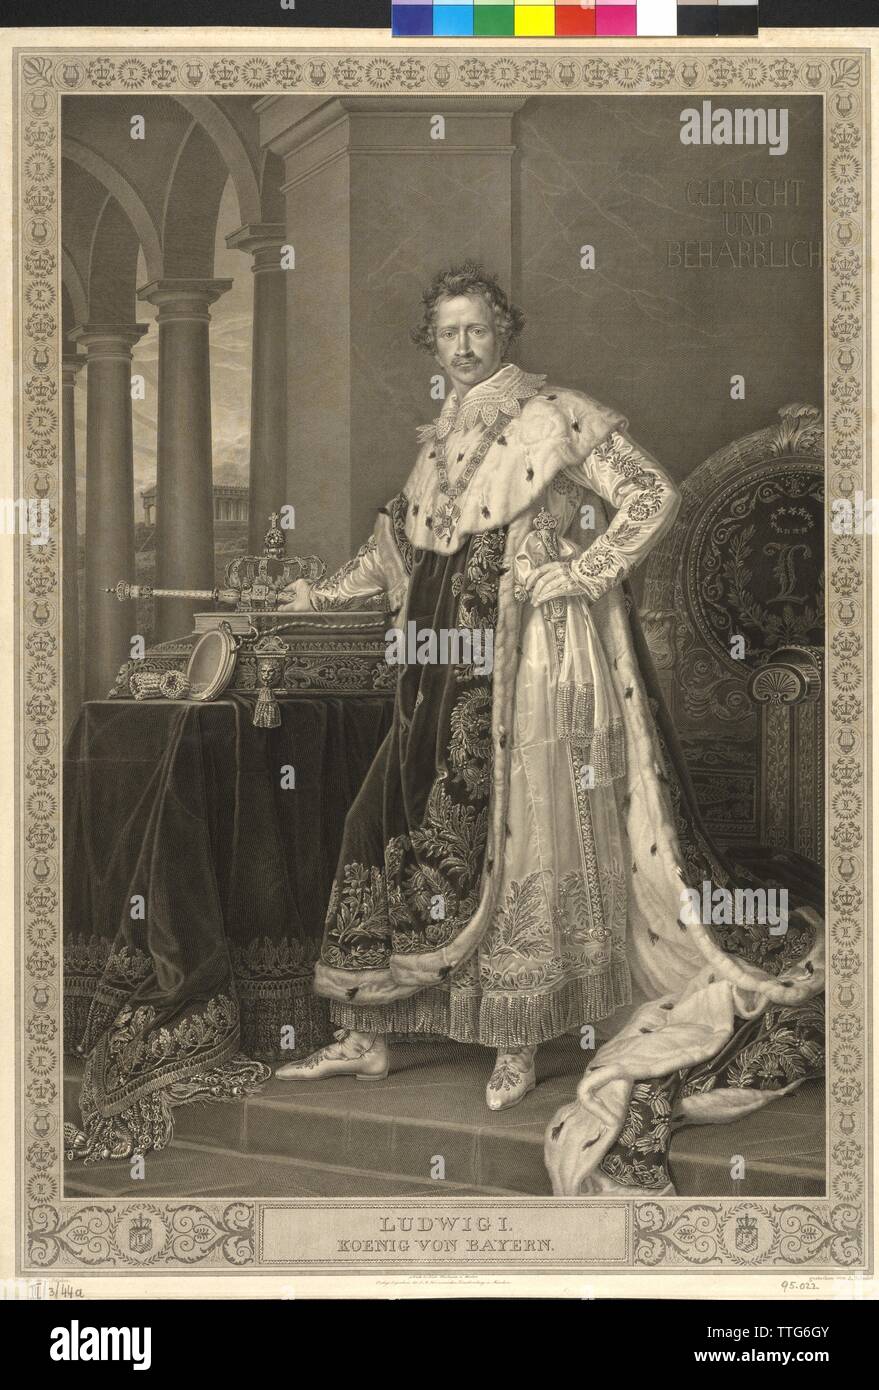 Louis I King of Bavaria, copper engraving / etching by Albert Reindel based on a painting by Joseph Karl Stieler, Additional-Rights-Clearance-Info-Not-Available Stock Photo